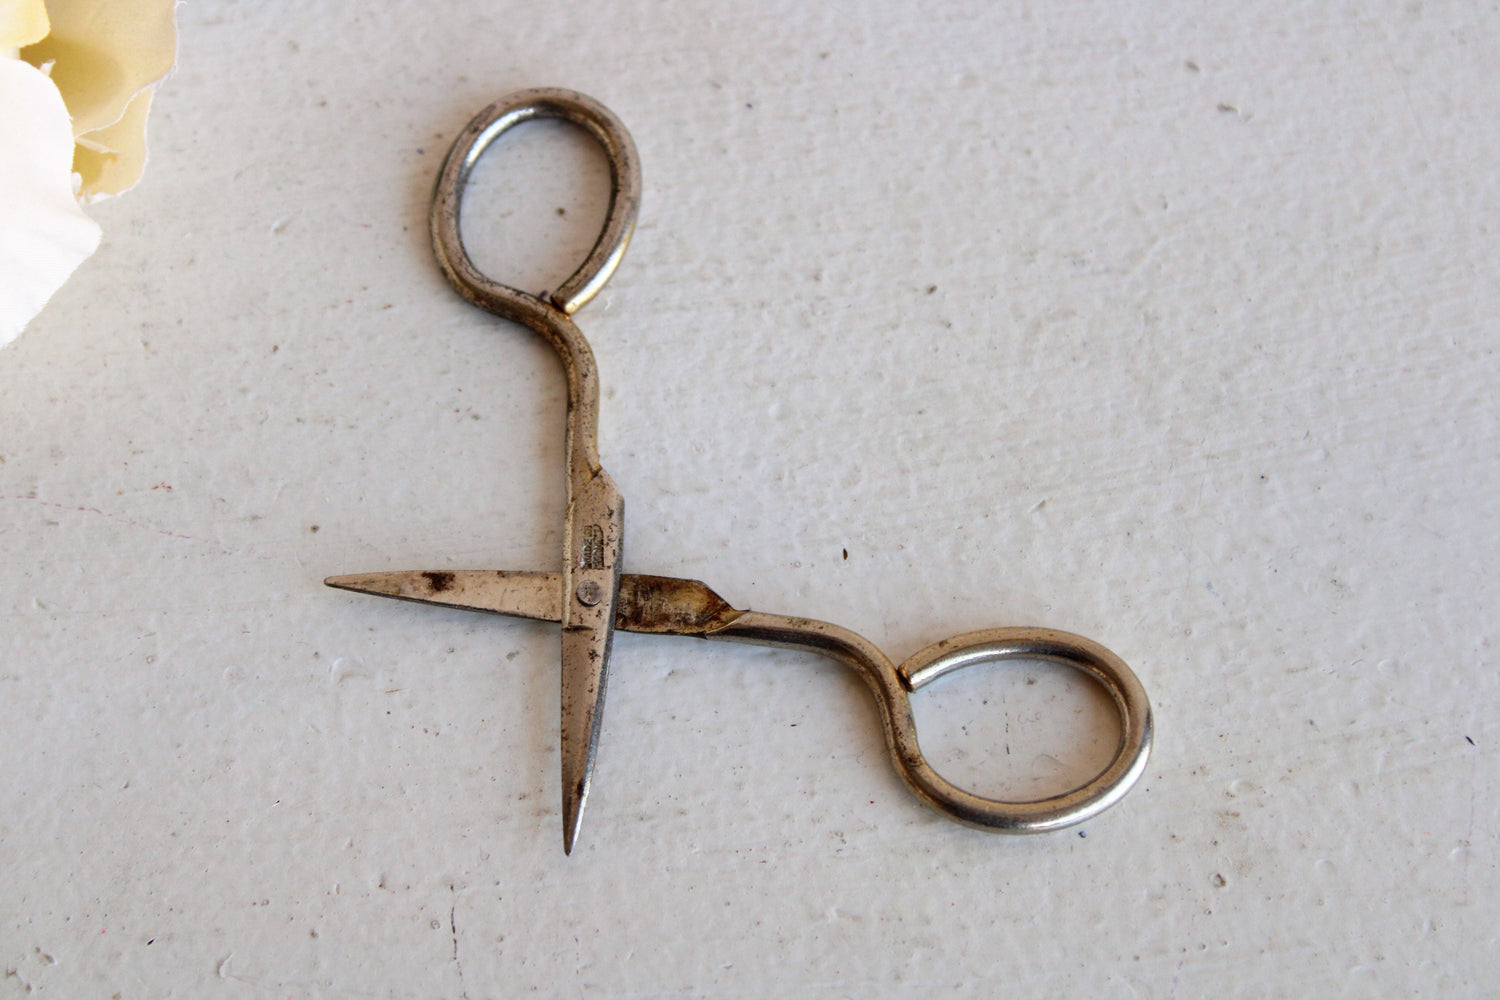 Vintage 1940s 1950s Embroidery Scissors From Germany